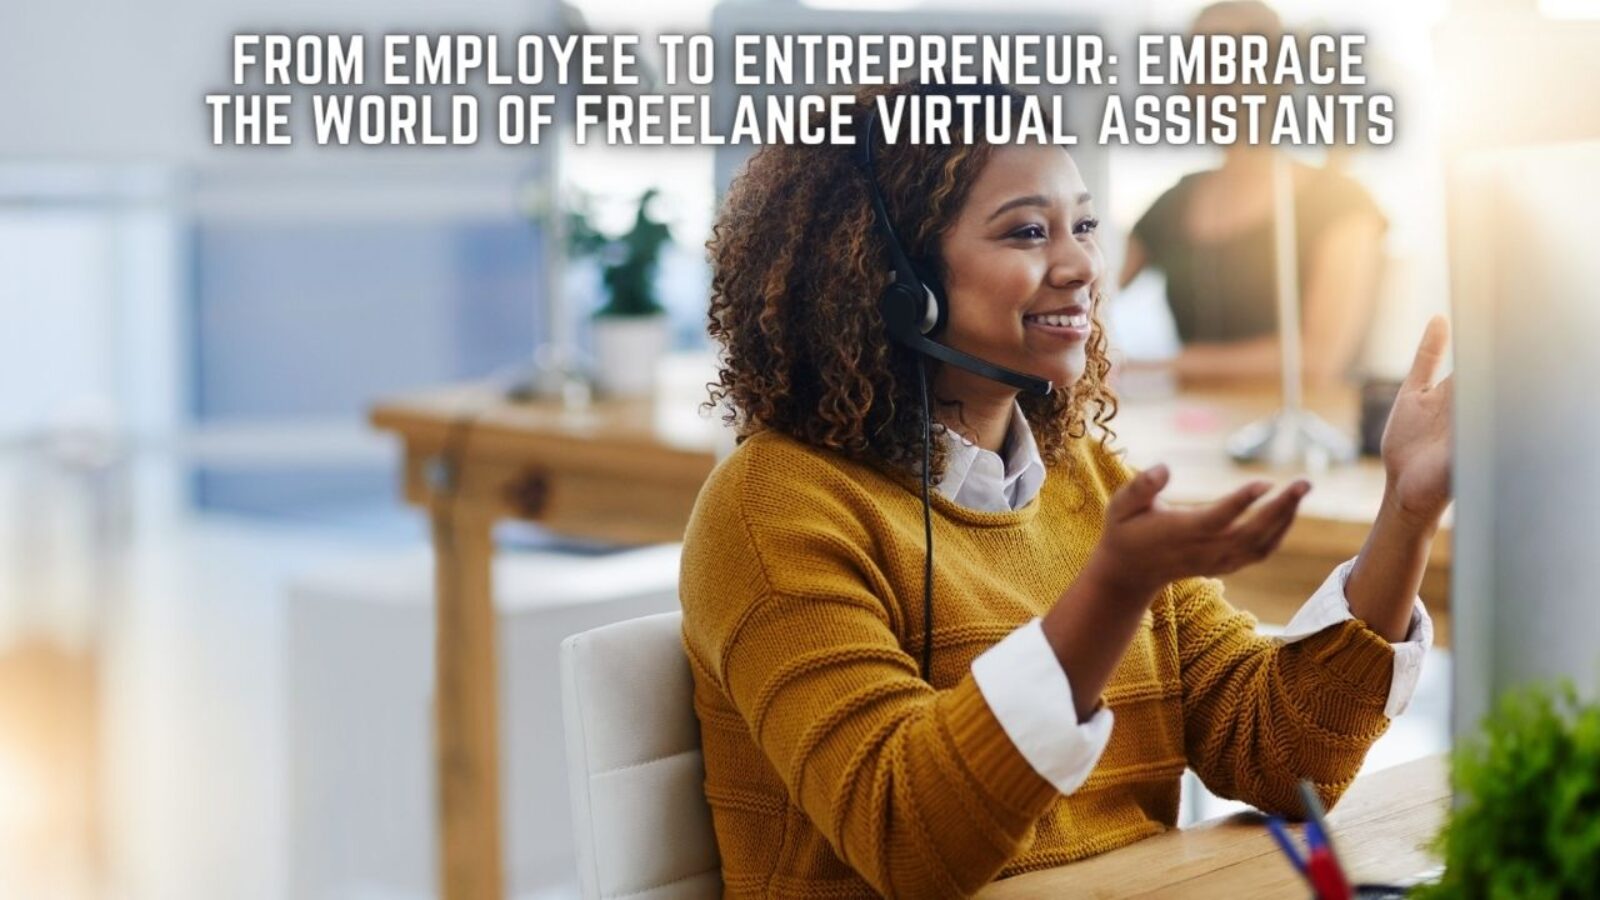 From Employee to Entrepreneur: Embrace the World of Freelance Virtual Assistants